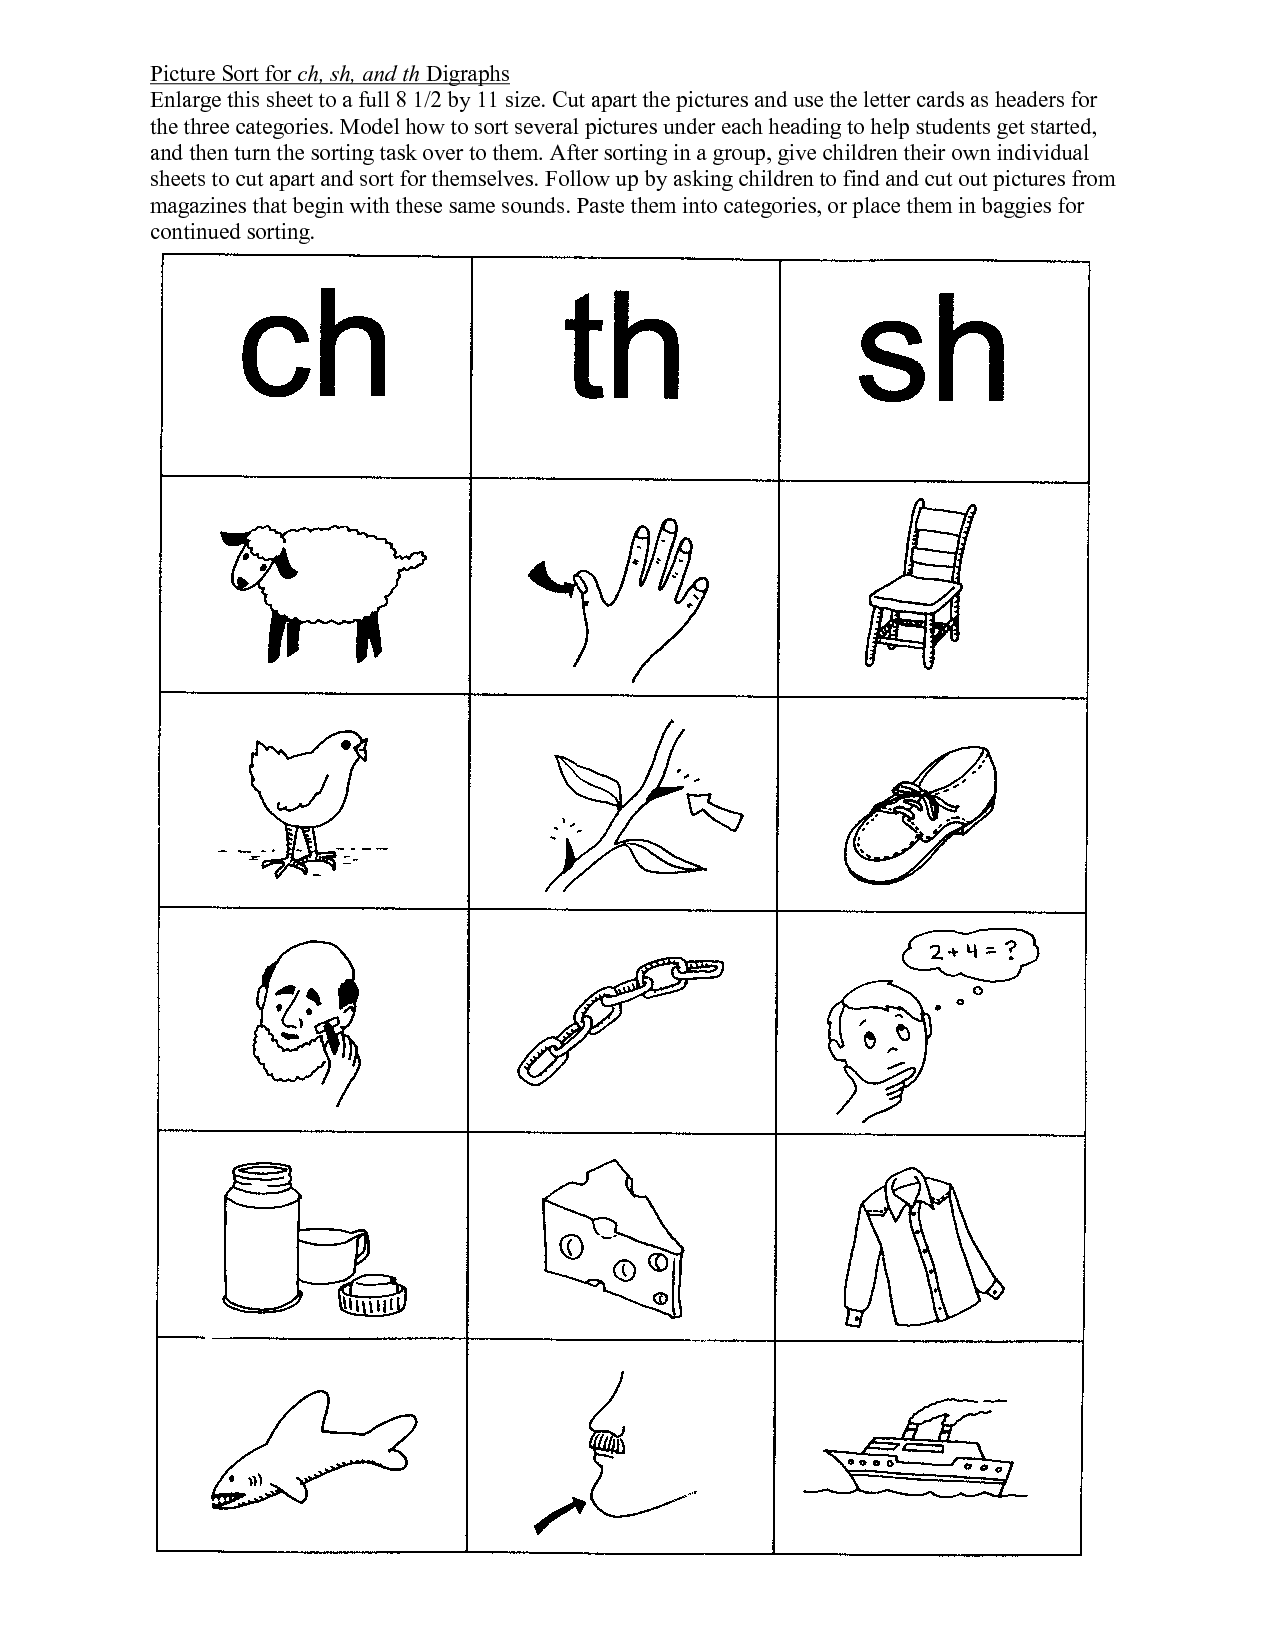 Free Sh CH Th Digraph Worksheets for Kindergarten Image